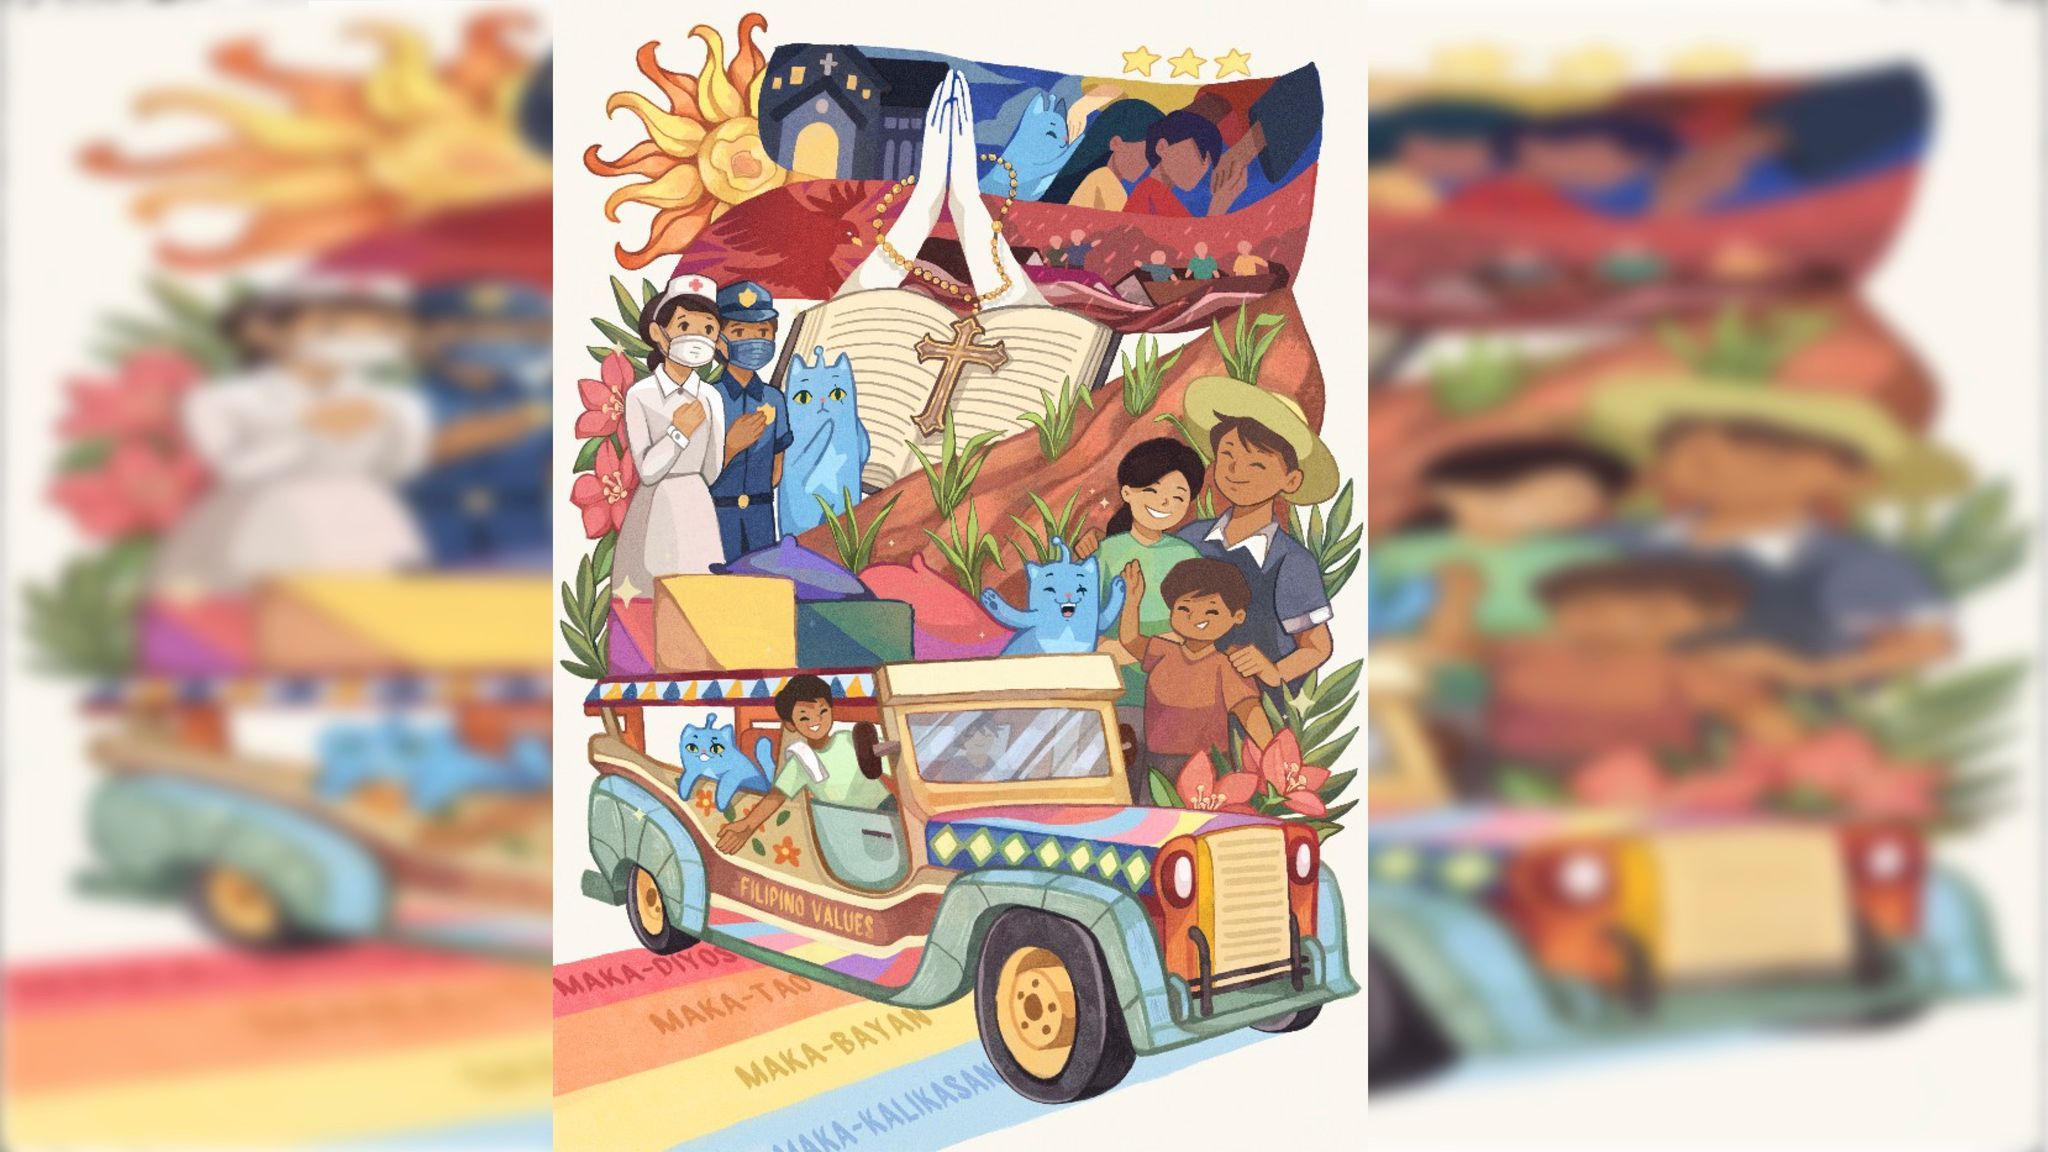 NCCA’s Heneral Tuna closes festive year with outstanding digital art from young Filipinos in second edition of fan art contest